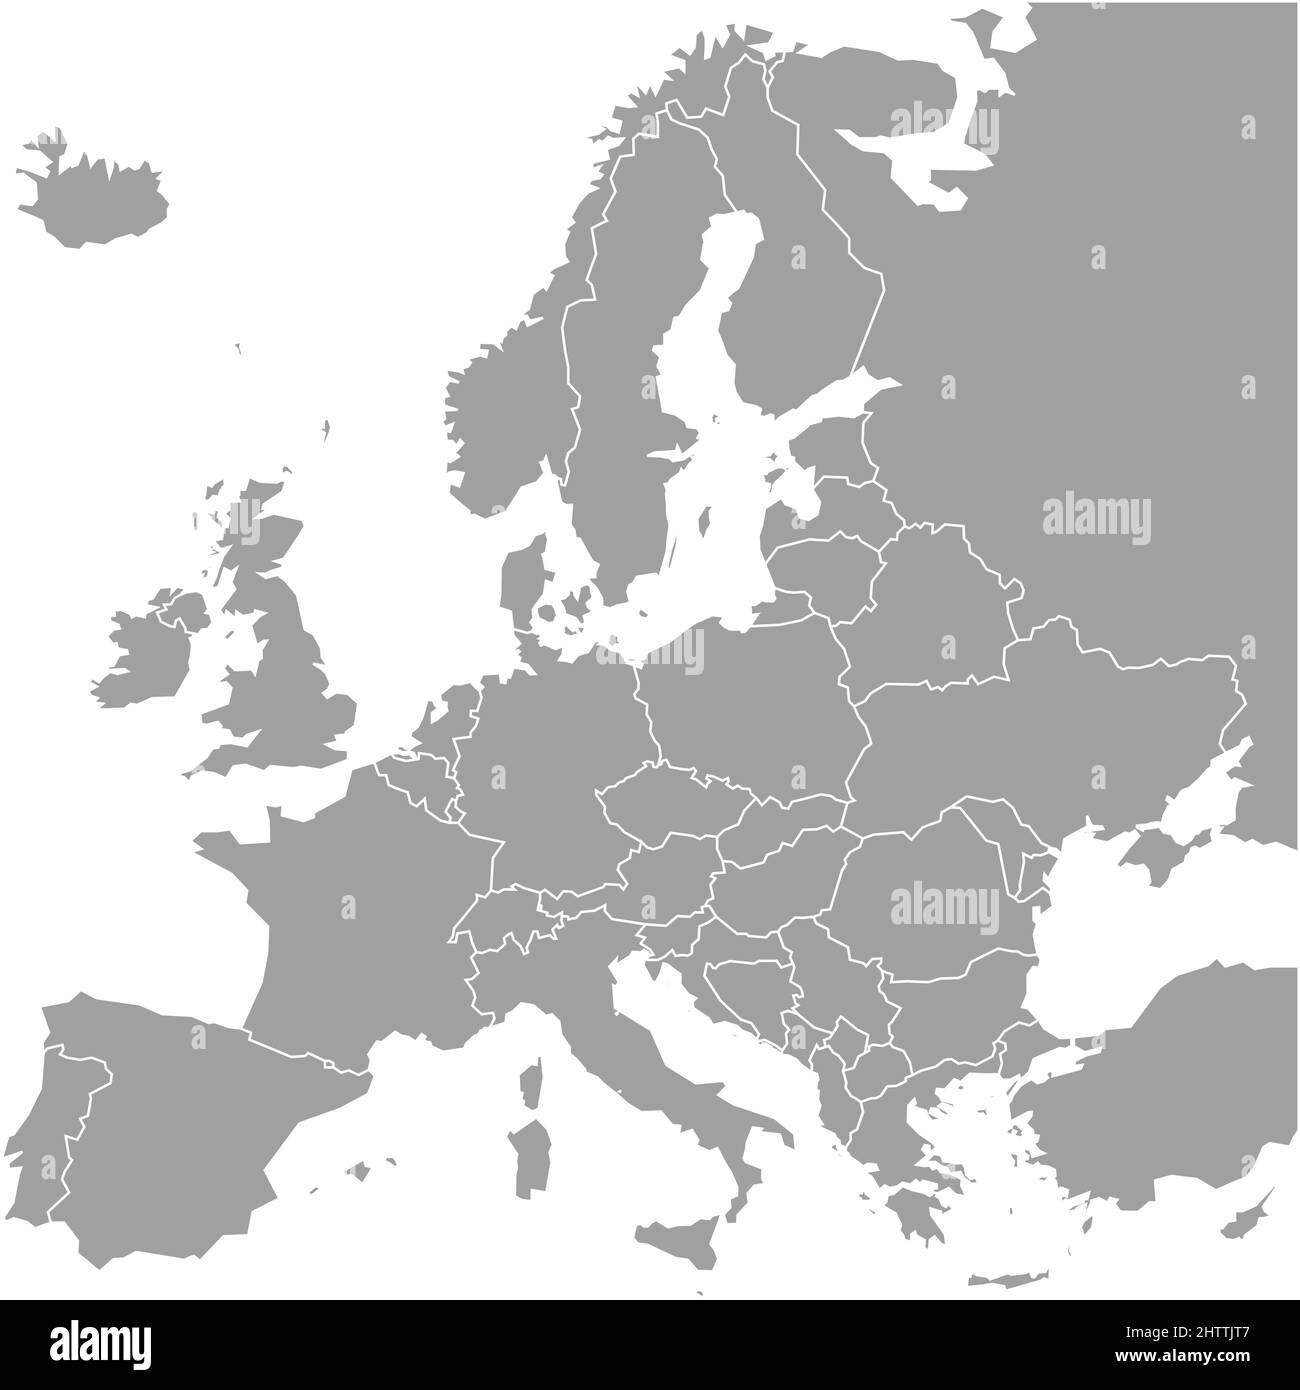 Blank map of Europe. Simplified vector map in grey with white borders on white background Stock Vector